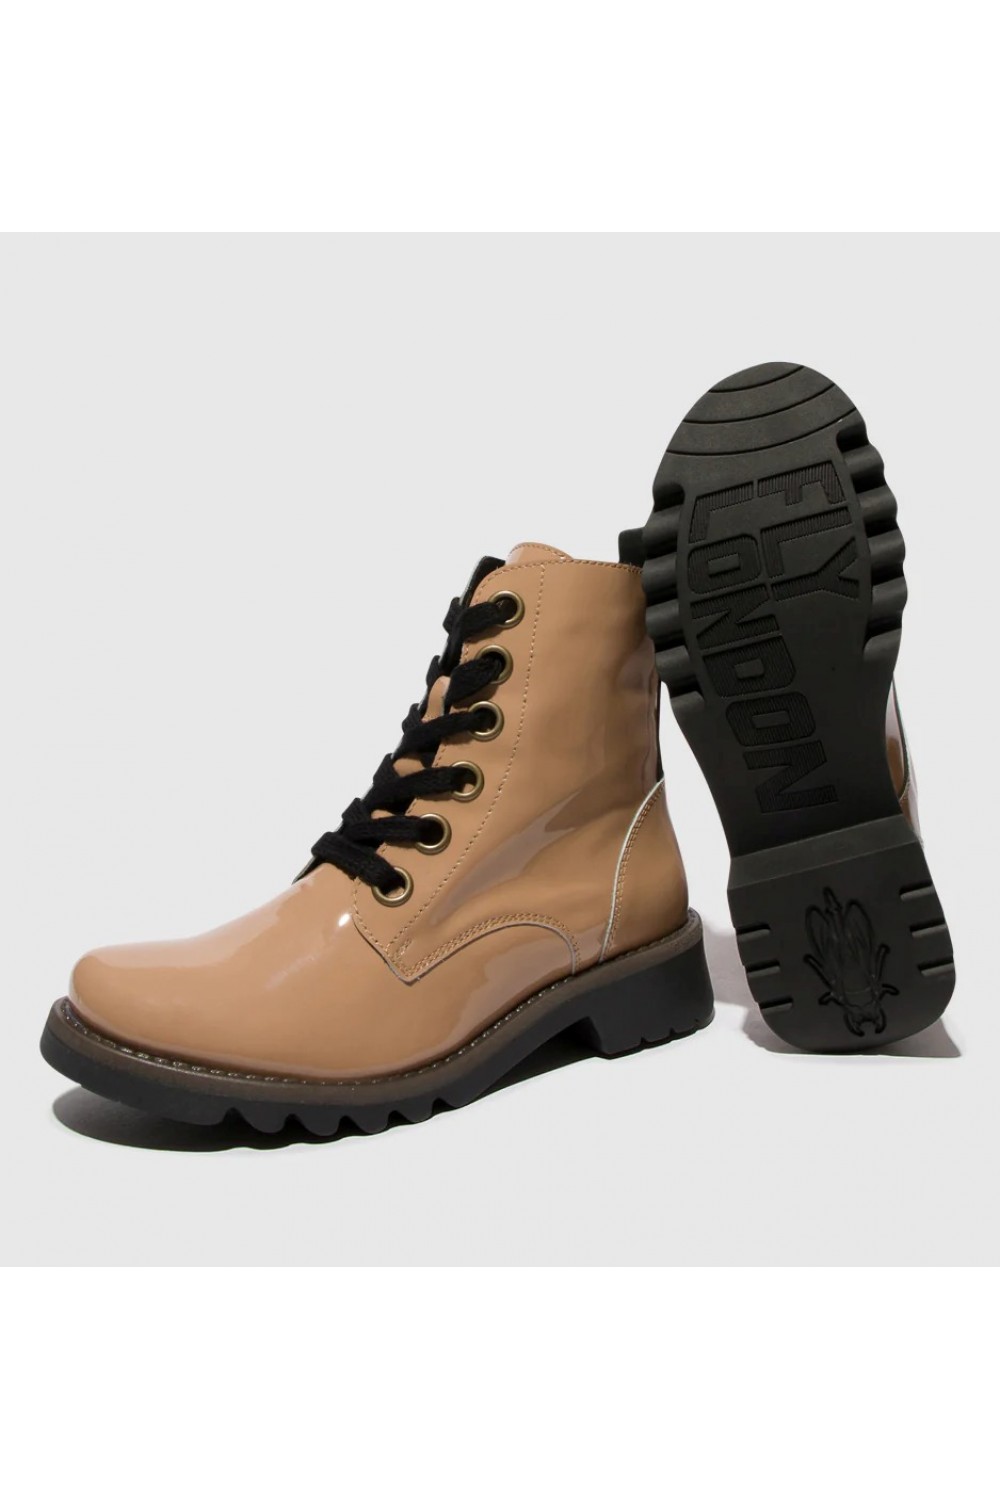 FLY LONDON Ragi539 Military Style Lace Up Boot Capuccino Patent Leather